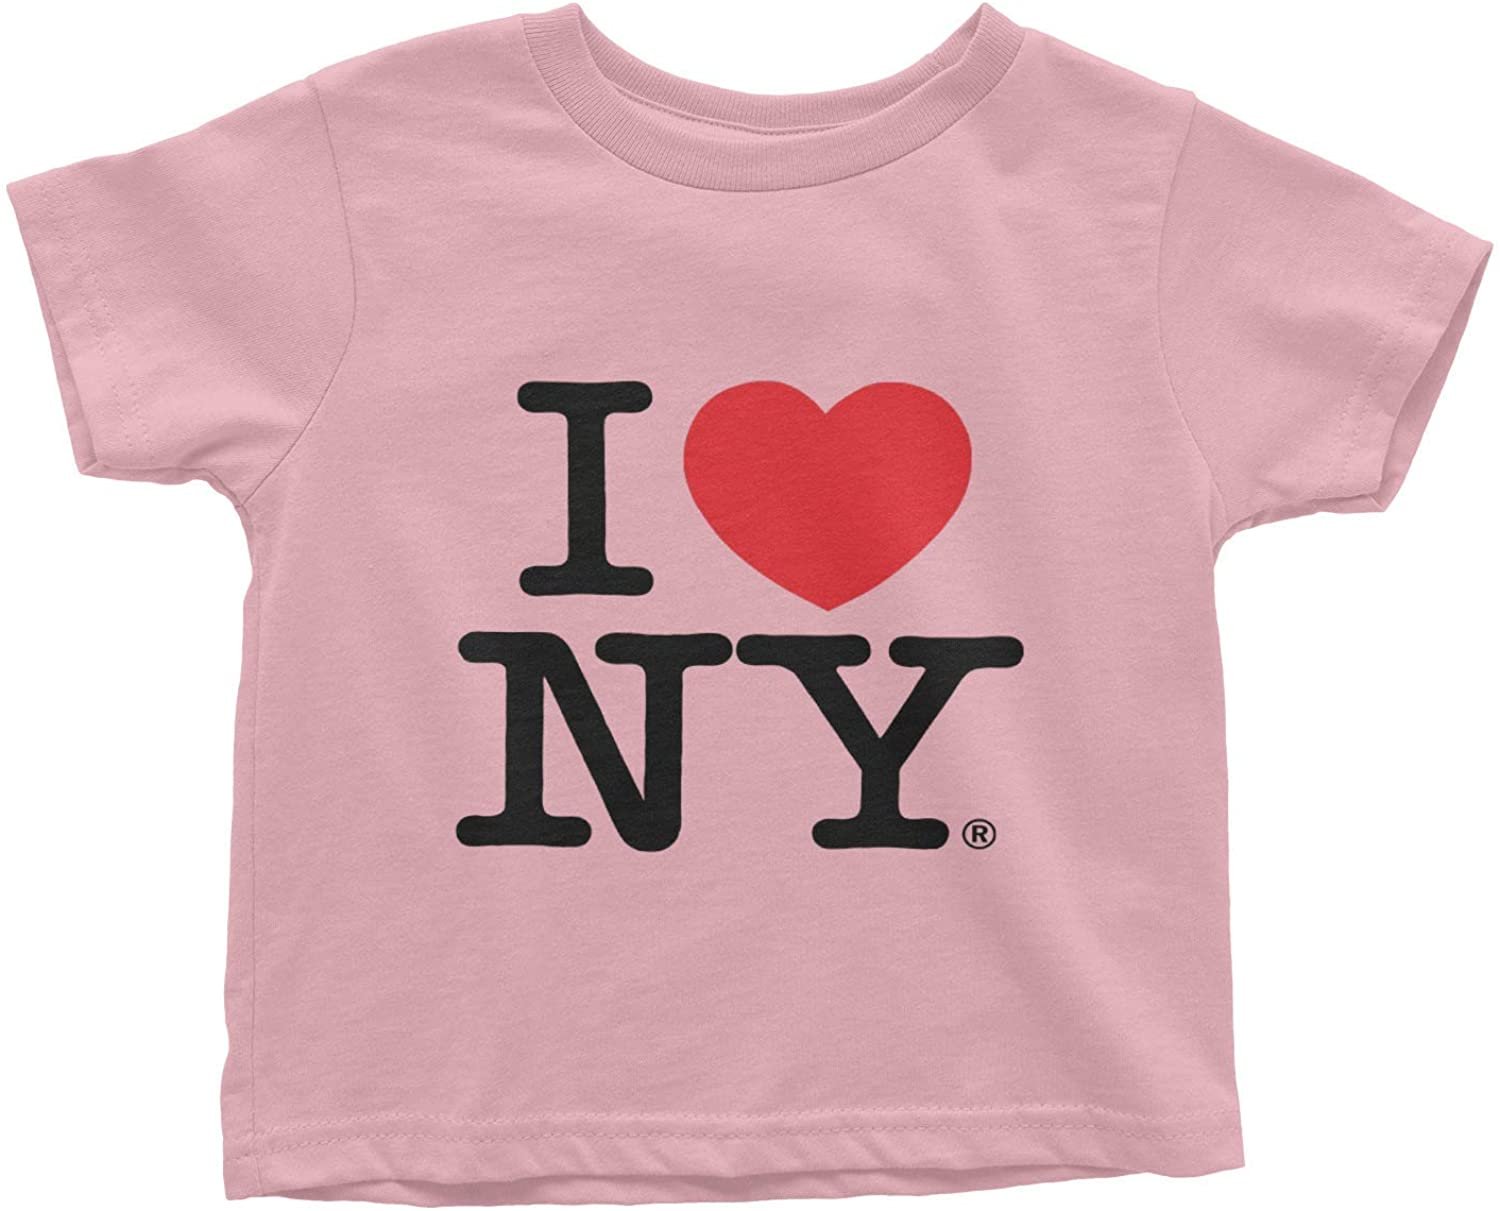 I Love NY Baby Tee Infant T-Shirt Officially Licensed T-Shirt New York ...